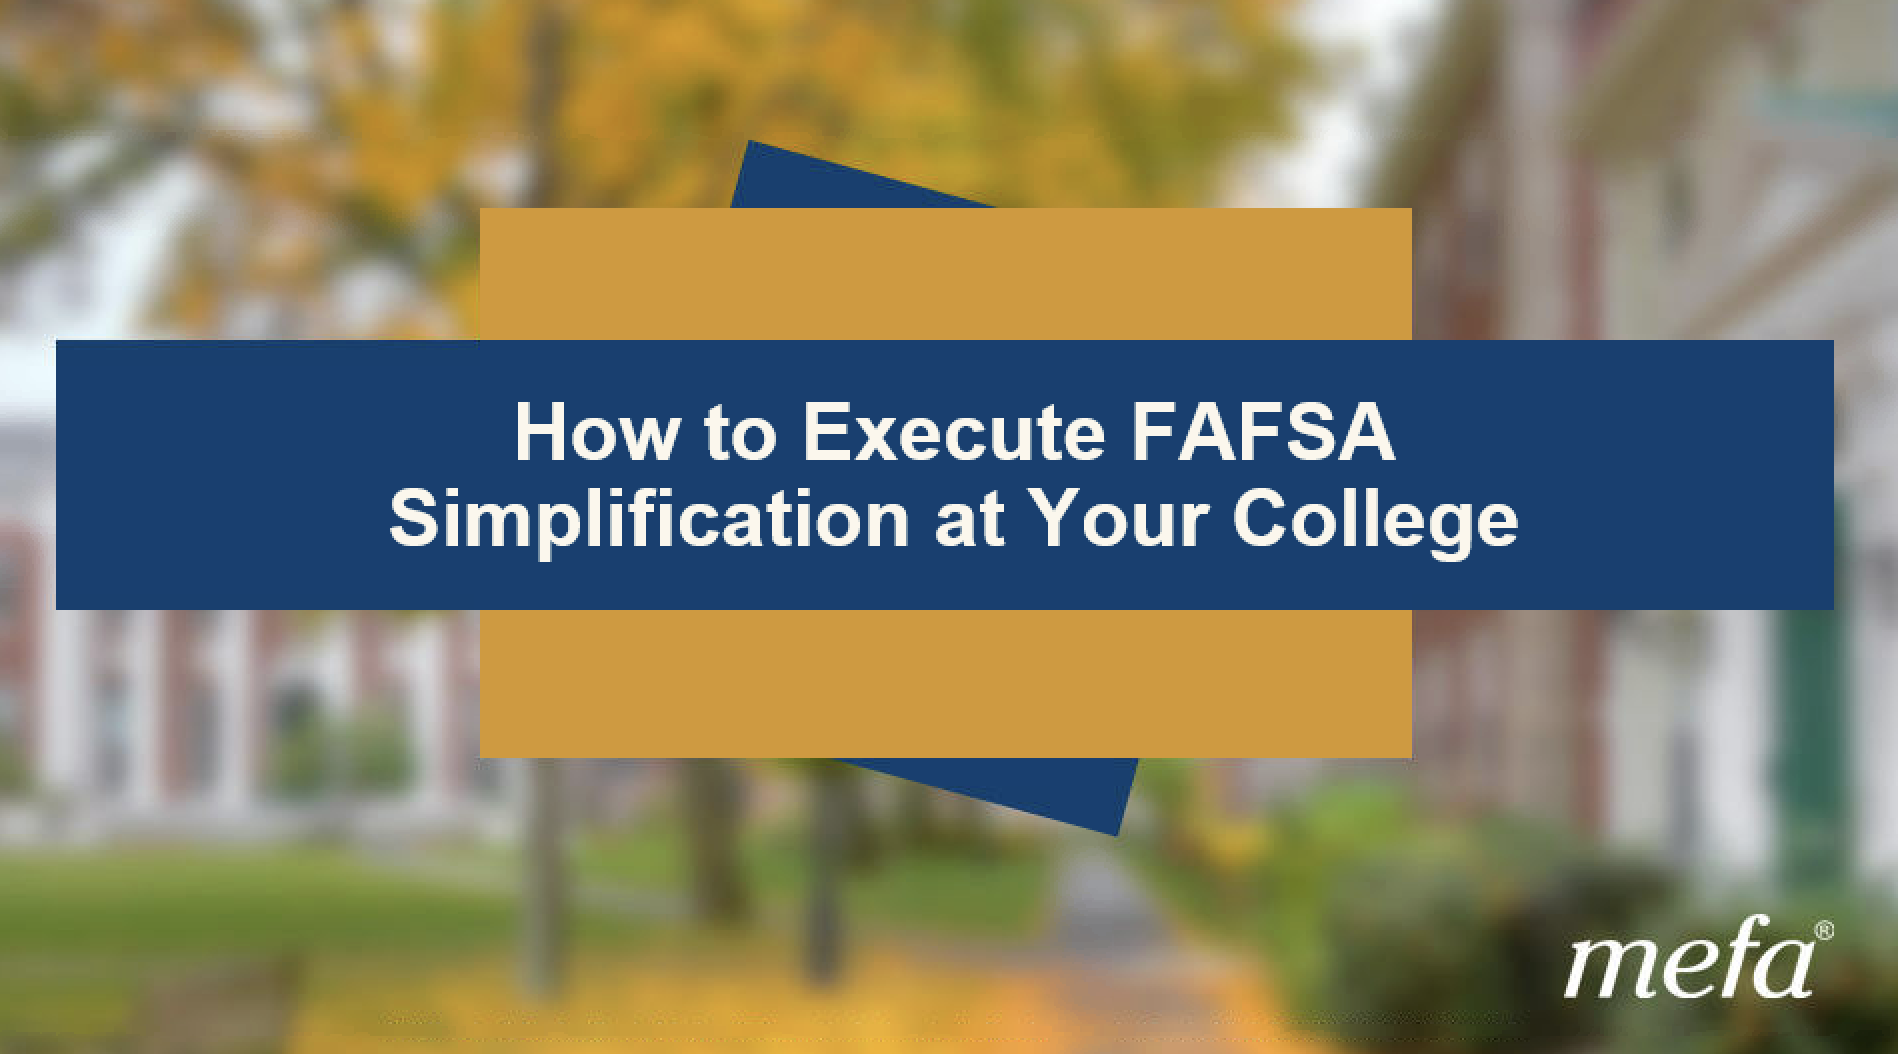 How to Execute FAFSA Simplification at Your College